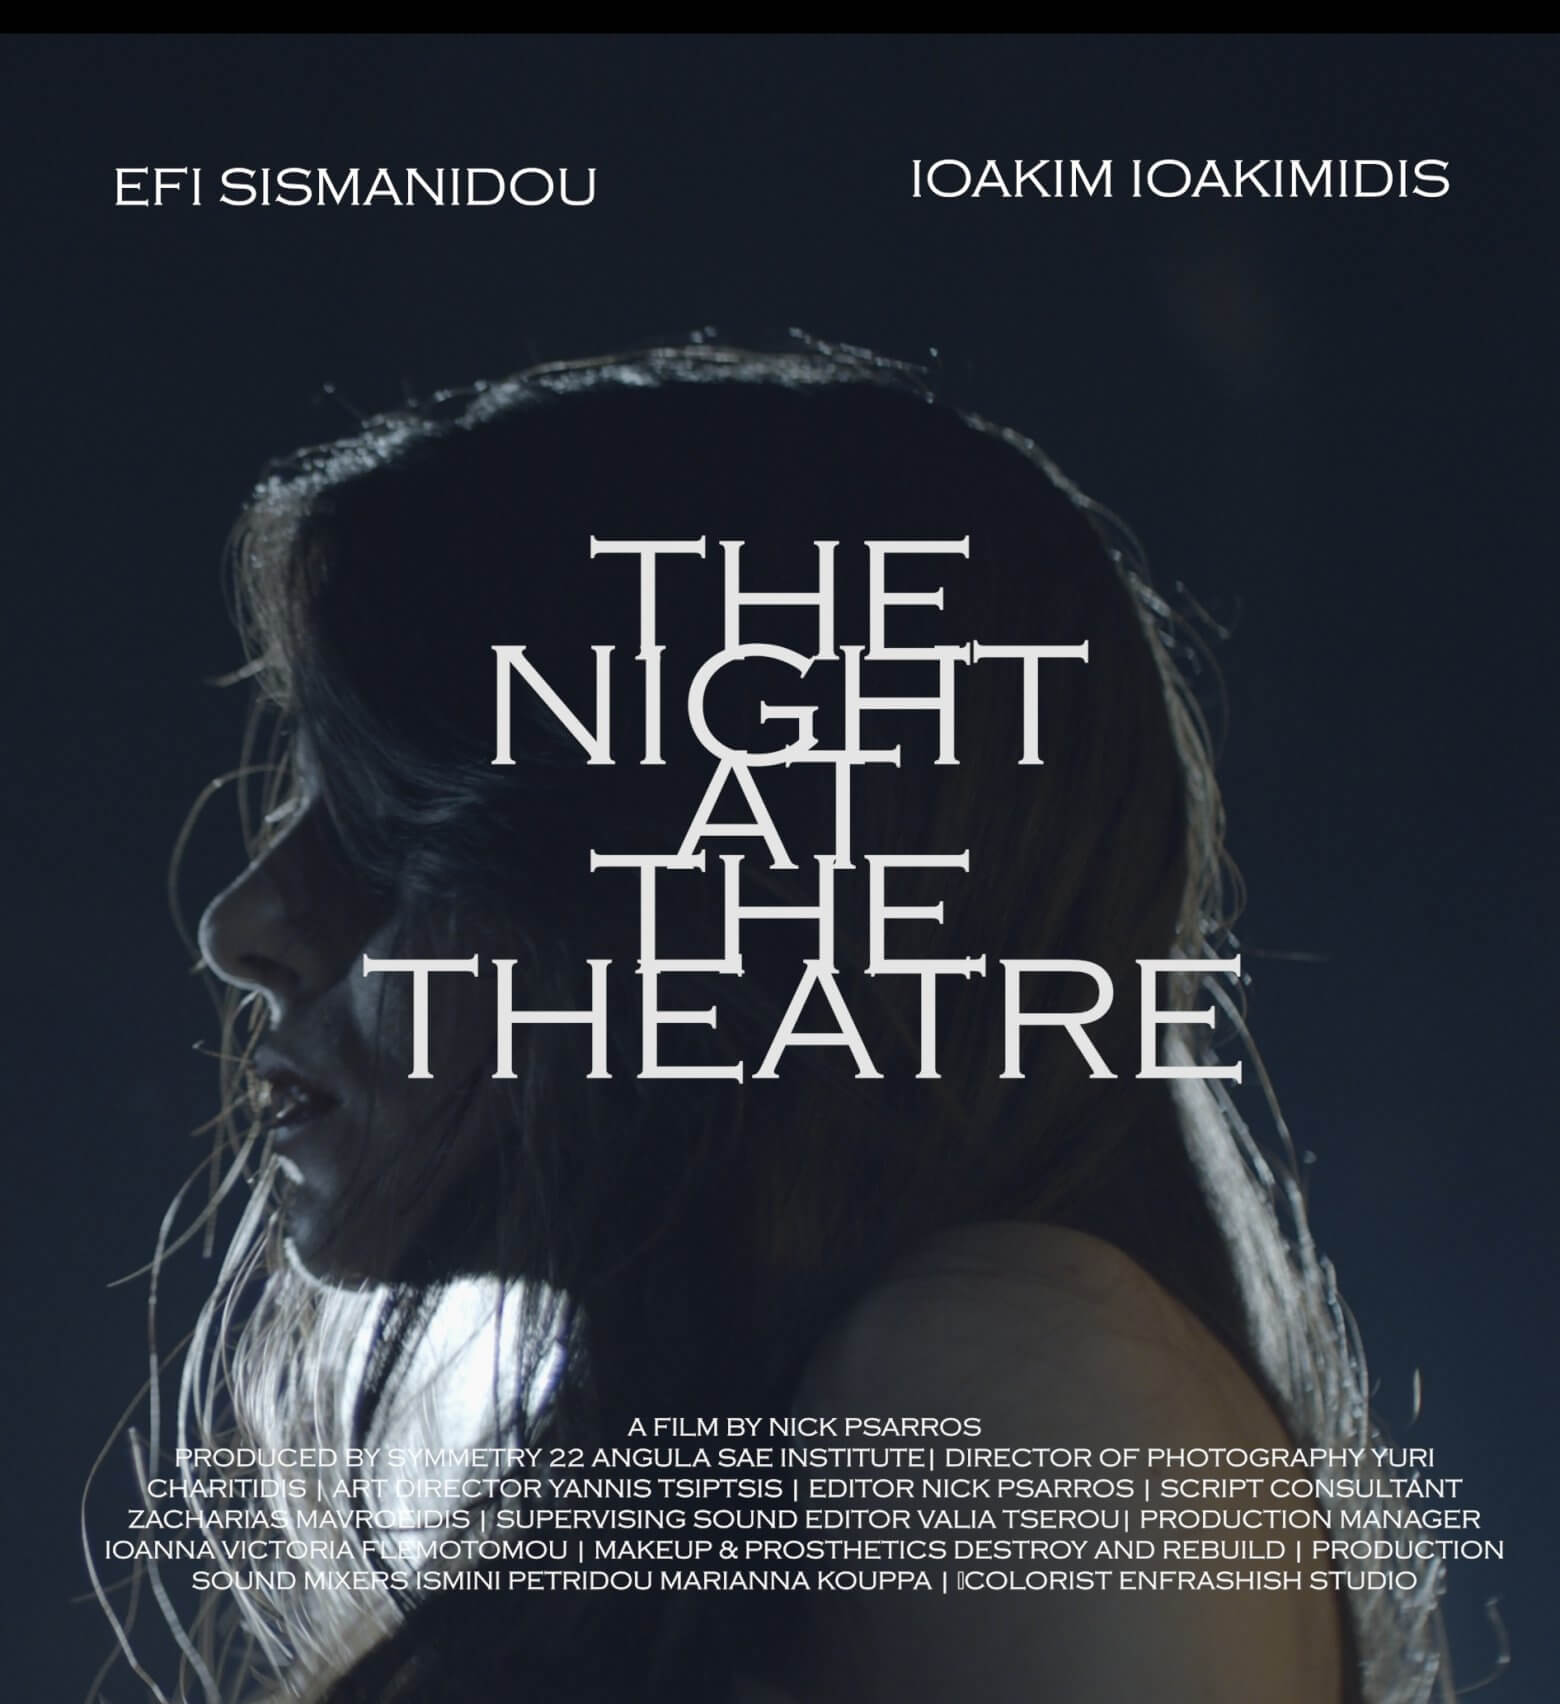 The Night at the Theatre